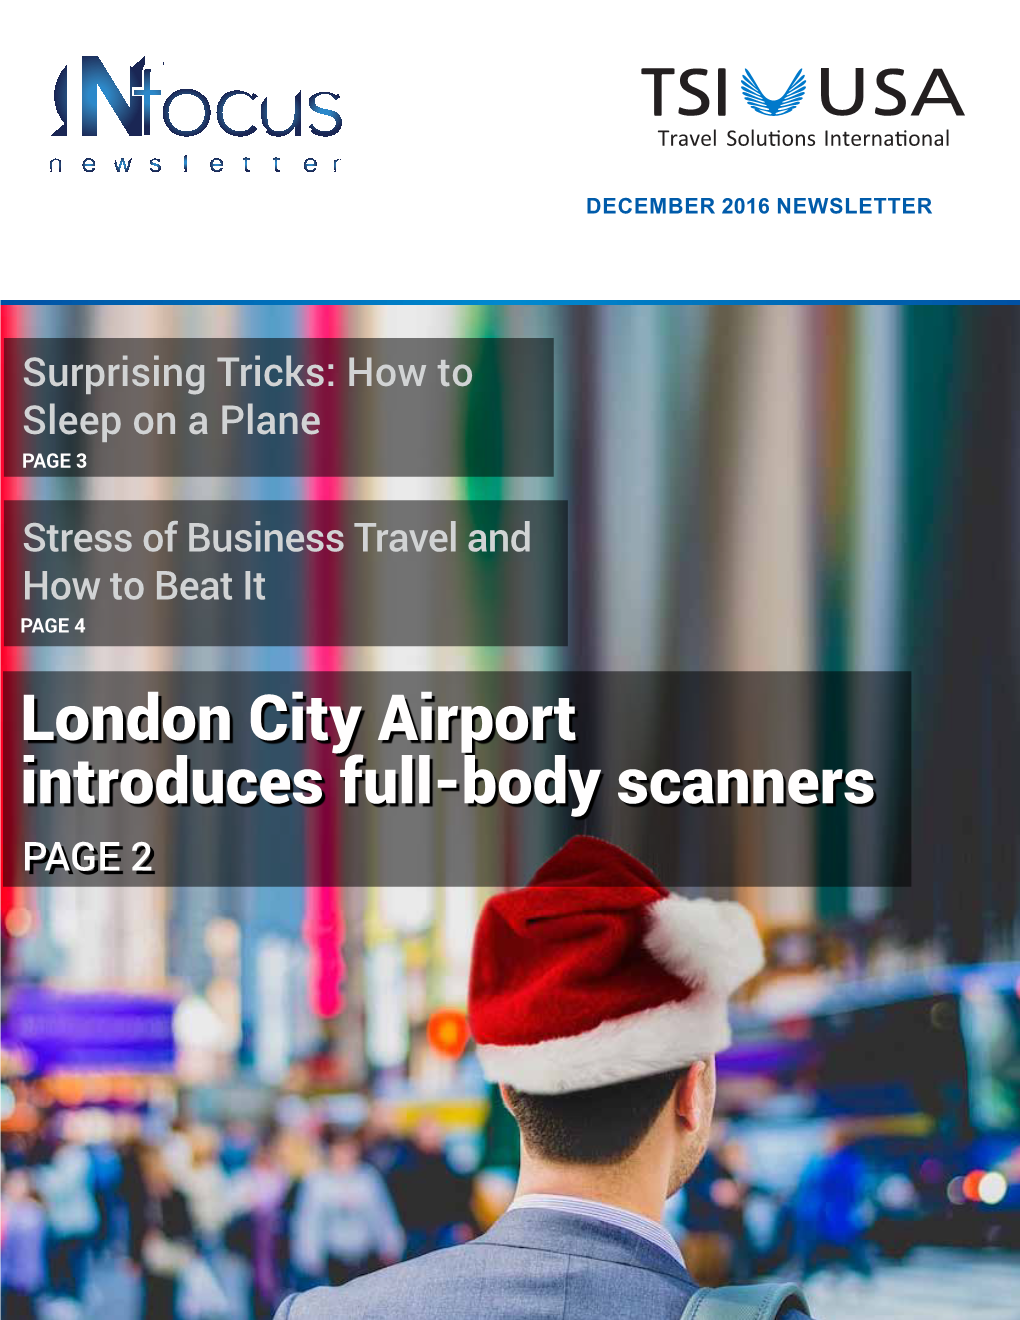 London City Airport Introduces Full-Body Scanners PAGE 2